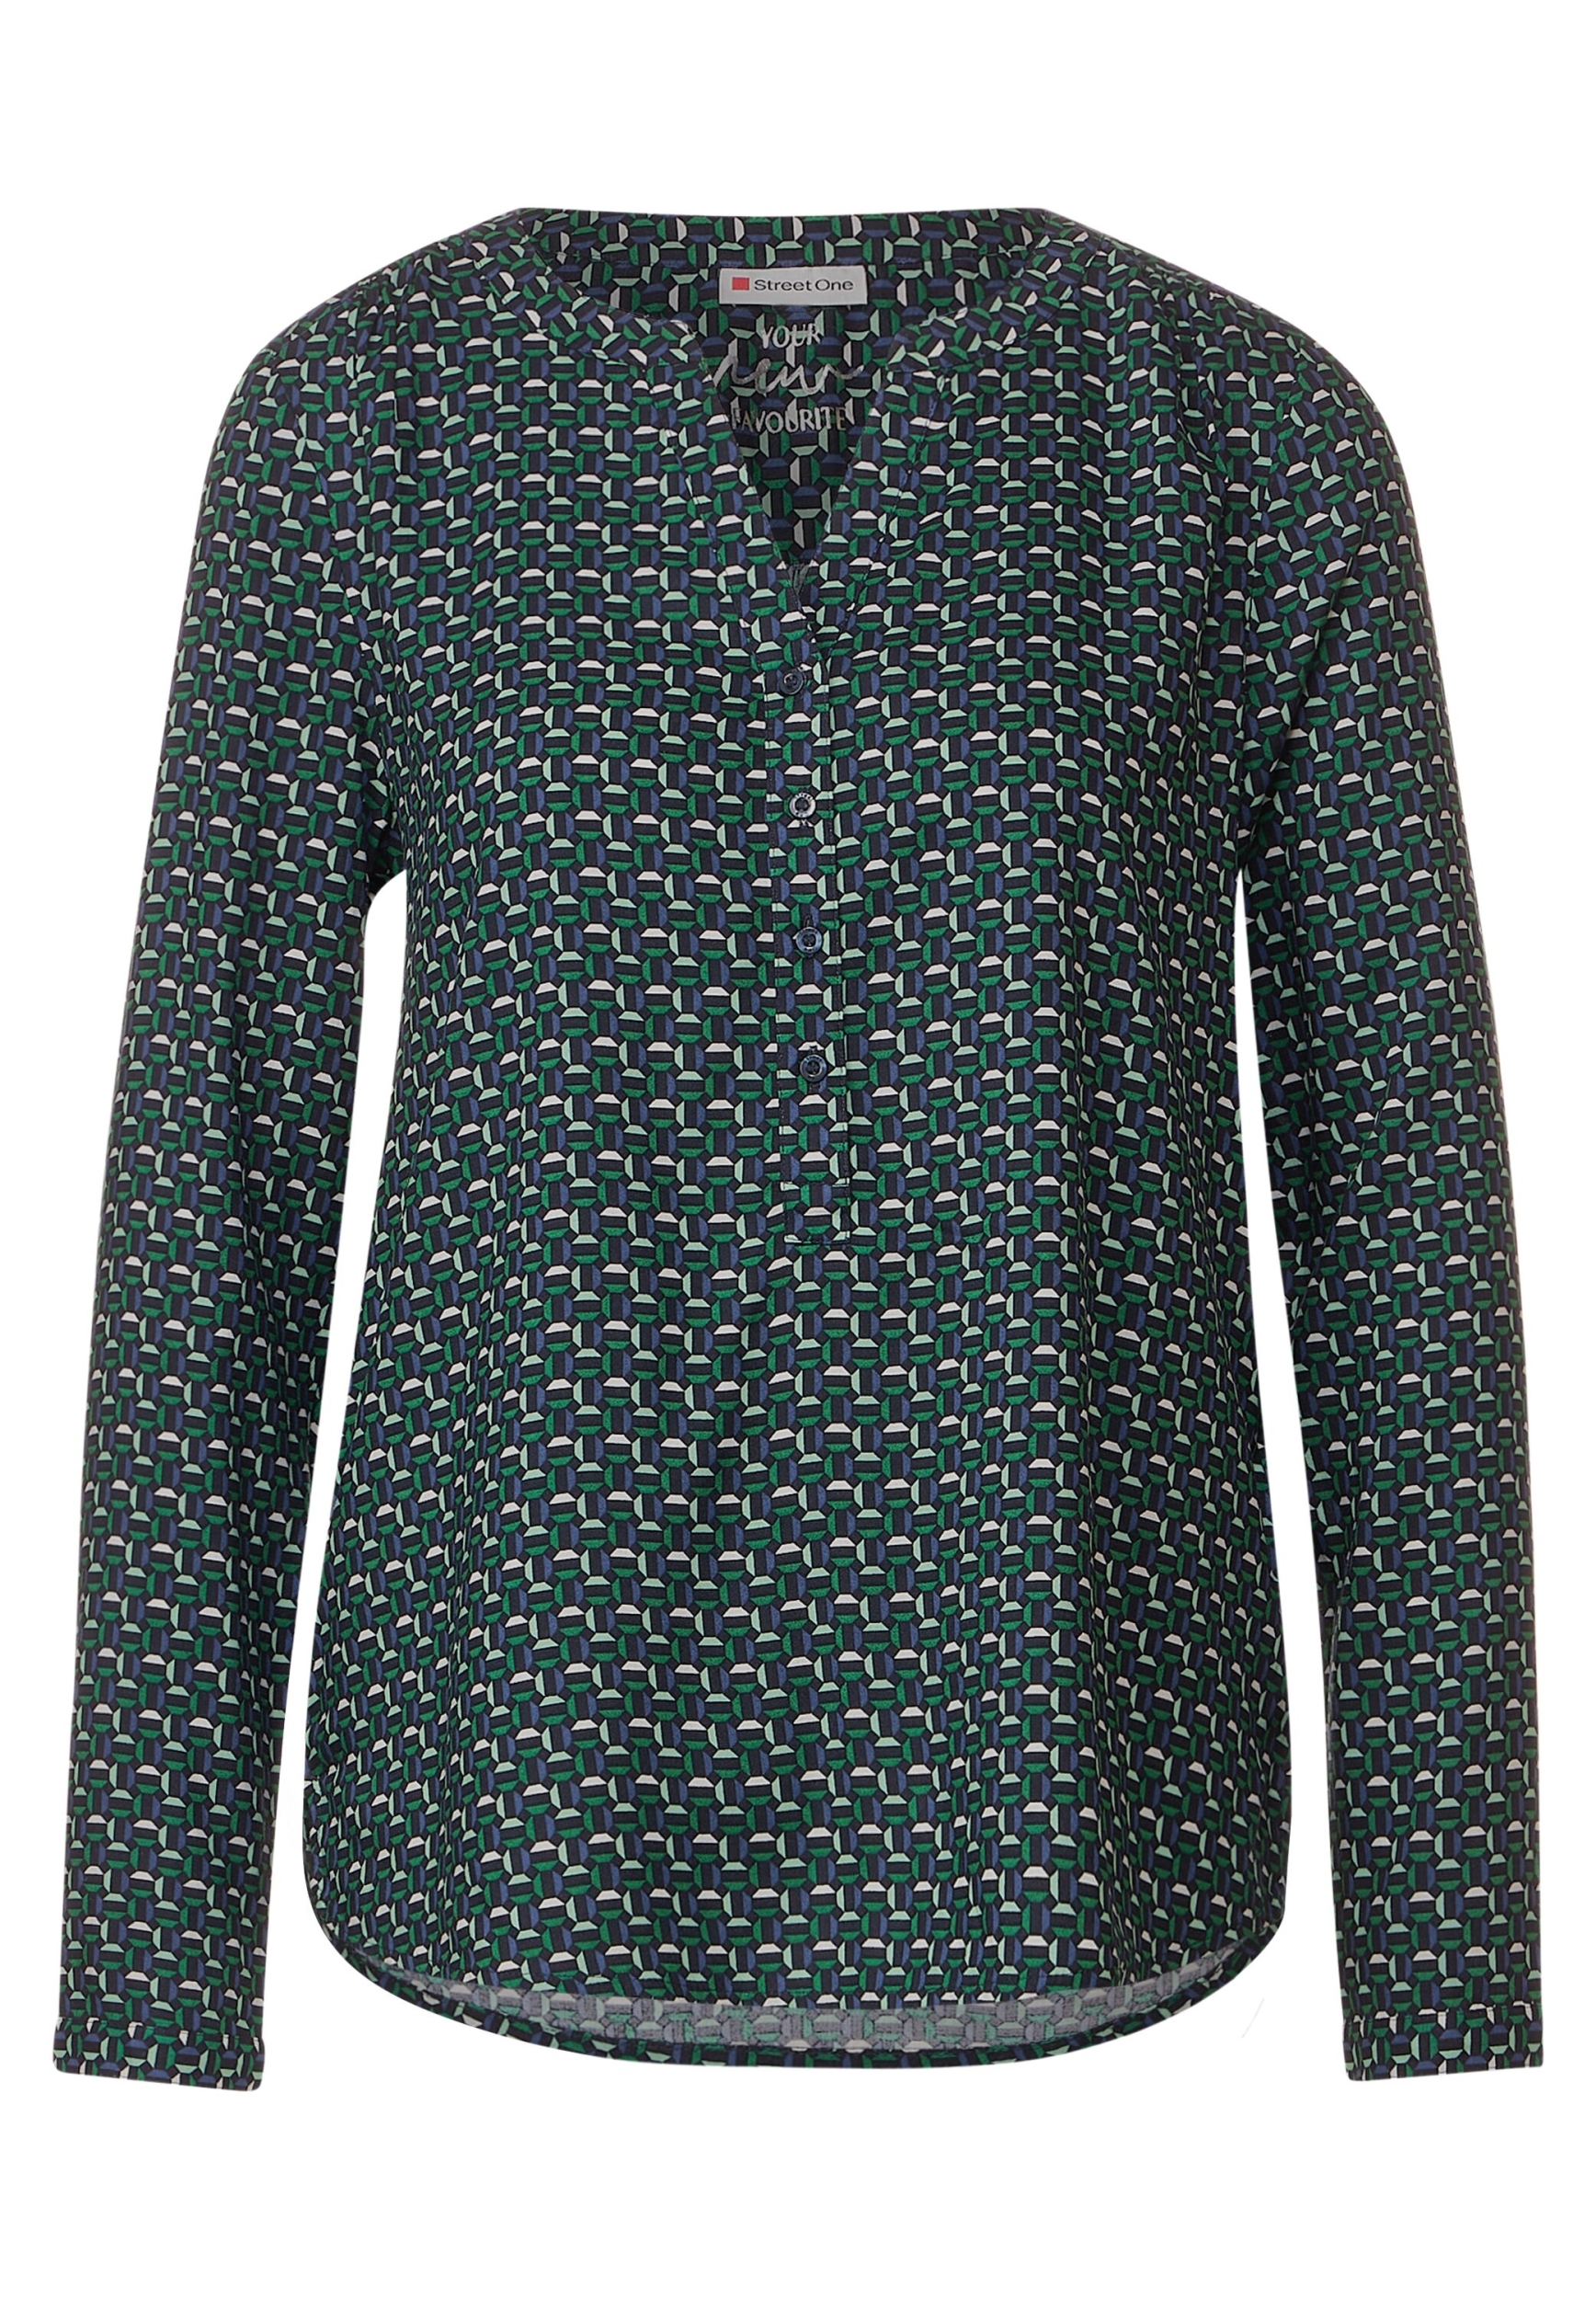 Printed satinblouse | out 40 | green A344194-35245-40 cut gentle | w